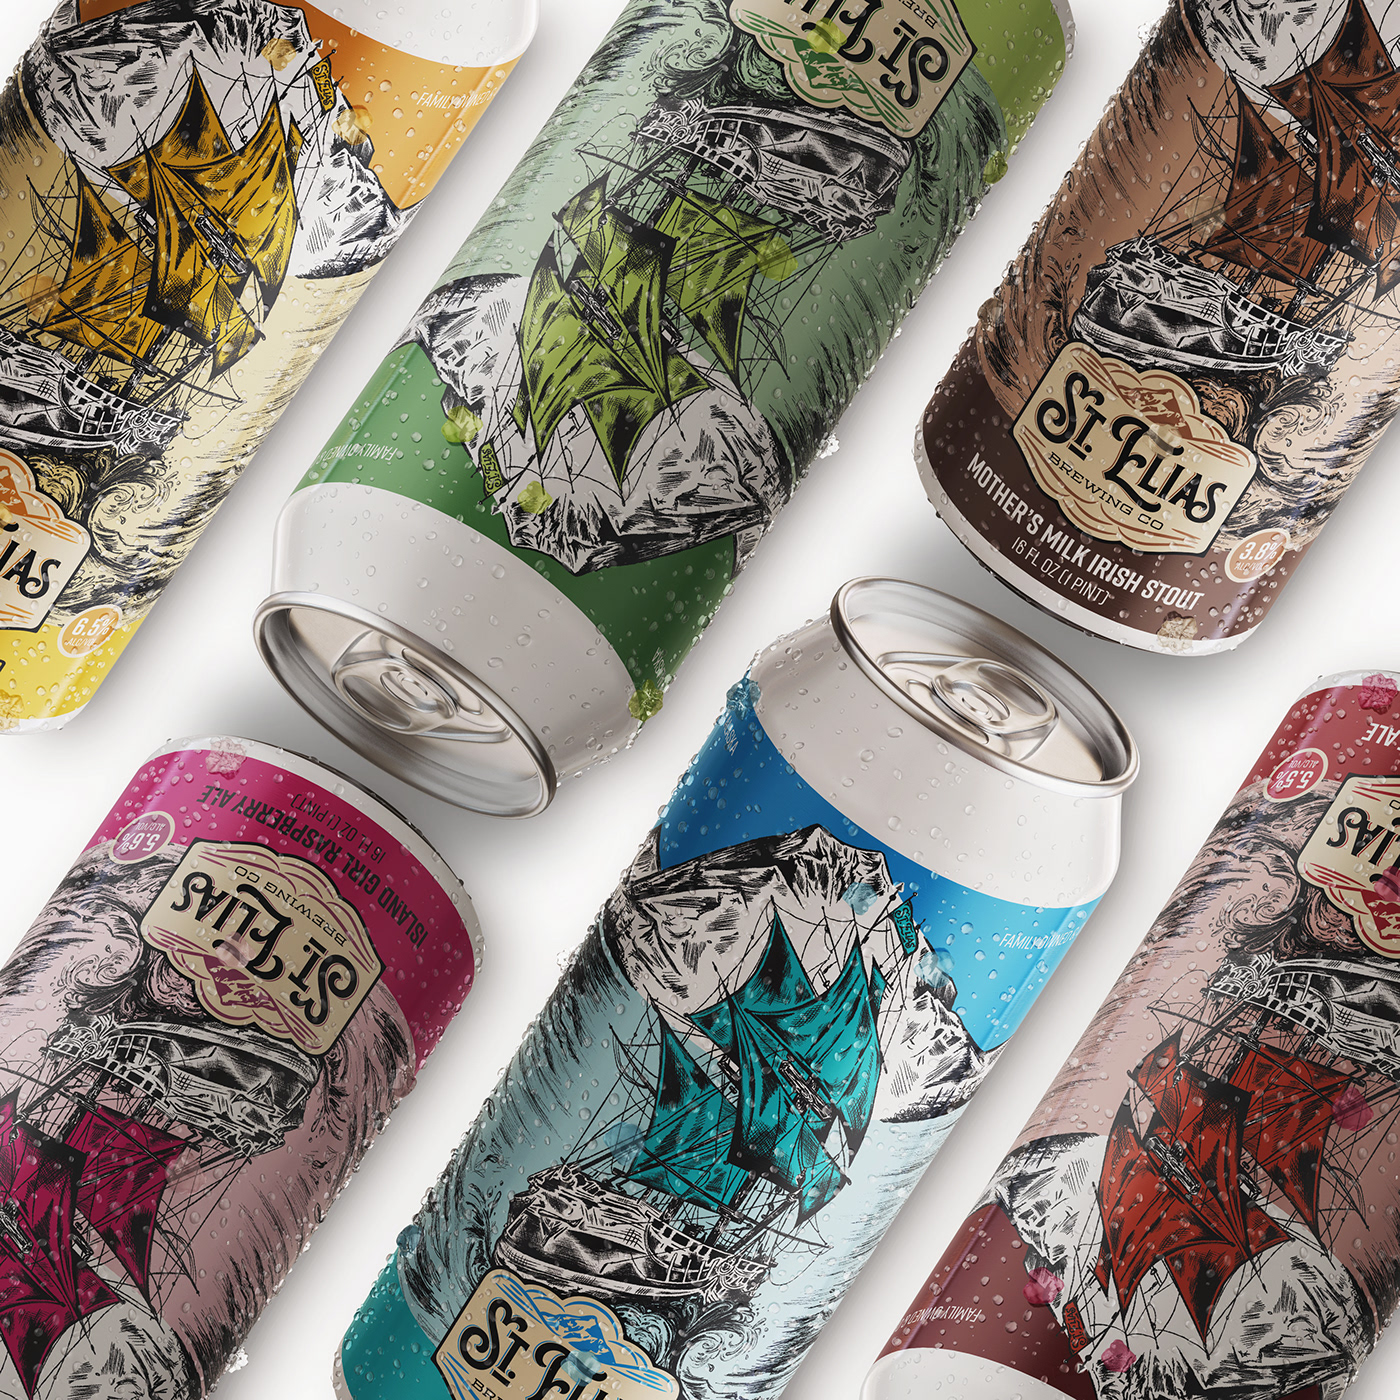 Beer label design and packaging showing branding and illustration work for St. Elias Brewing Company